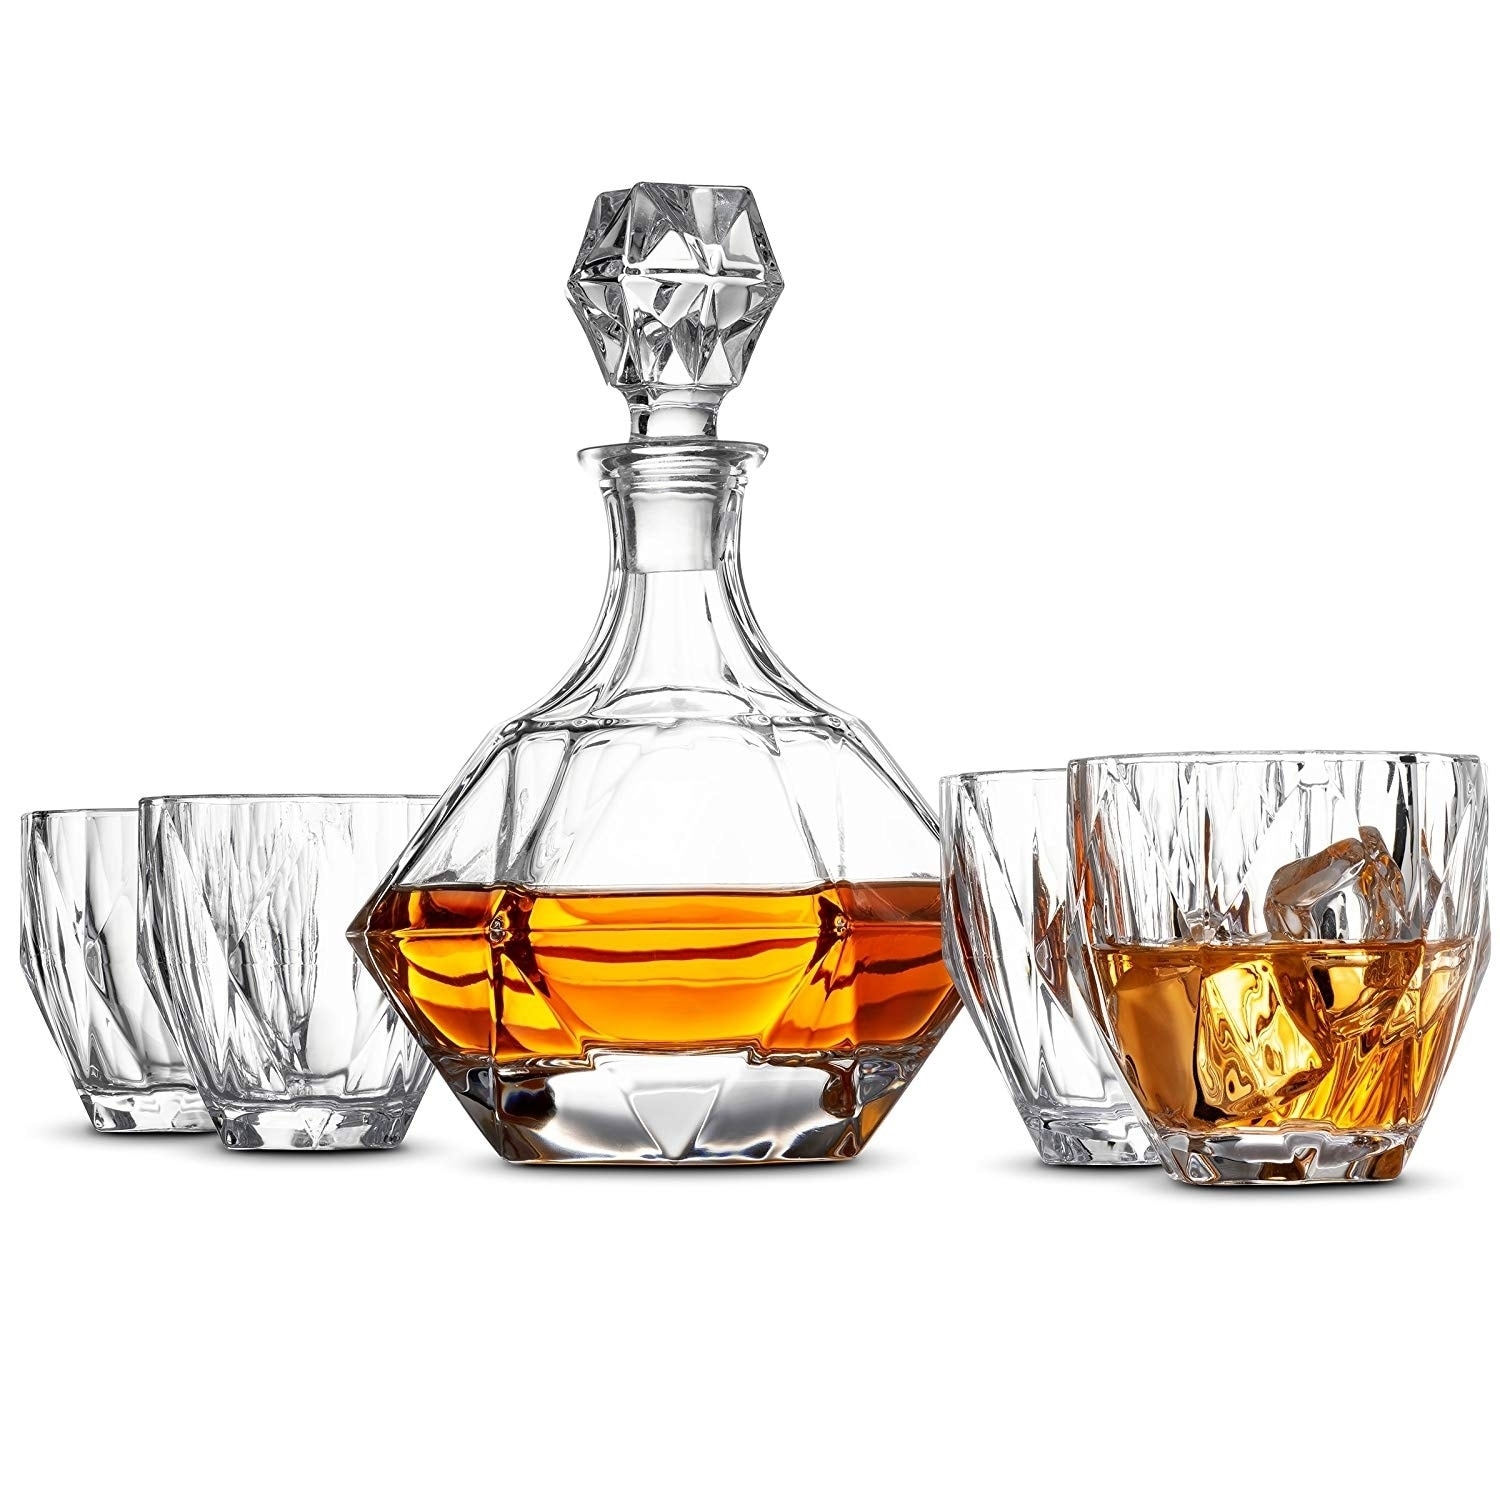 23 oz Christmas Gifts for Dad Limited Edition Custom Liquor Decanter Personalized 5 pc Whiskey Decanter Set 680ml w/ 4pcs Whiskey Glass Set Boss Gifts for Men Rectangular #2 